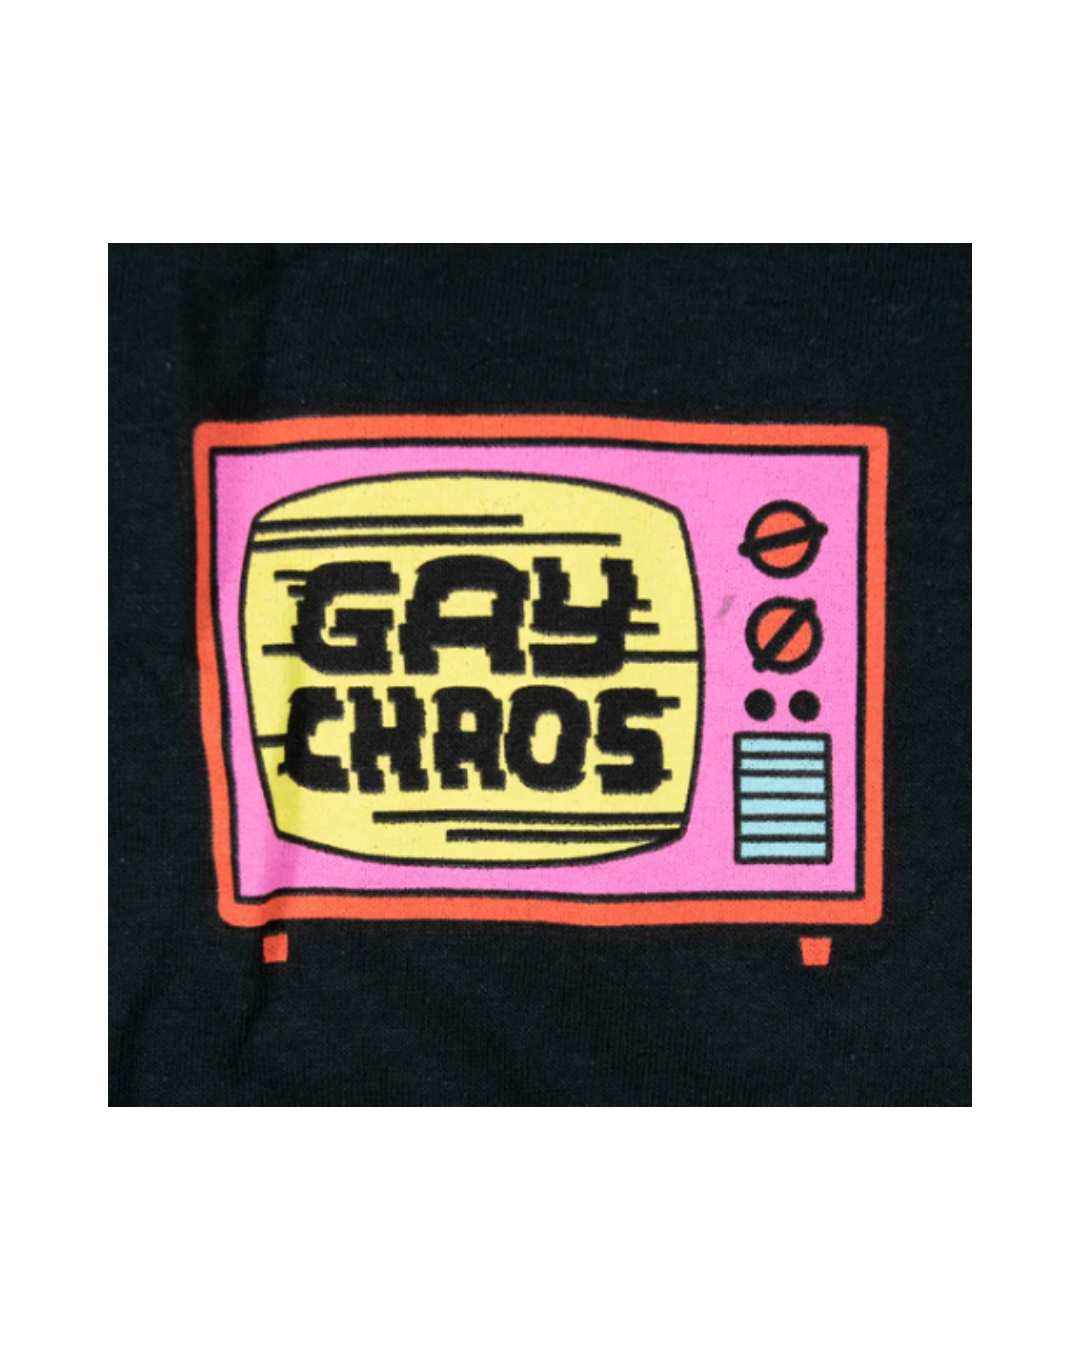 A close up of the "GAY CHAOS" logo on the tank top.